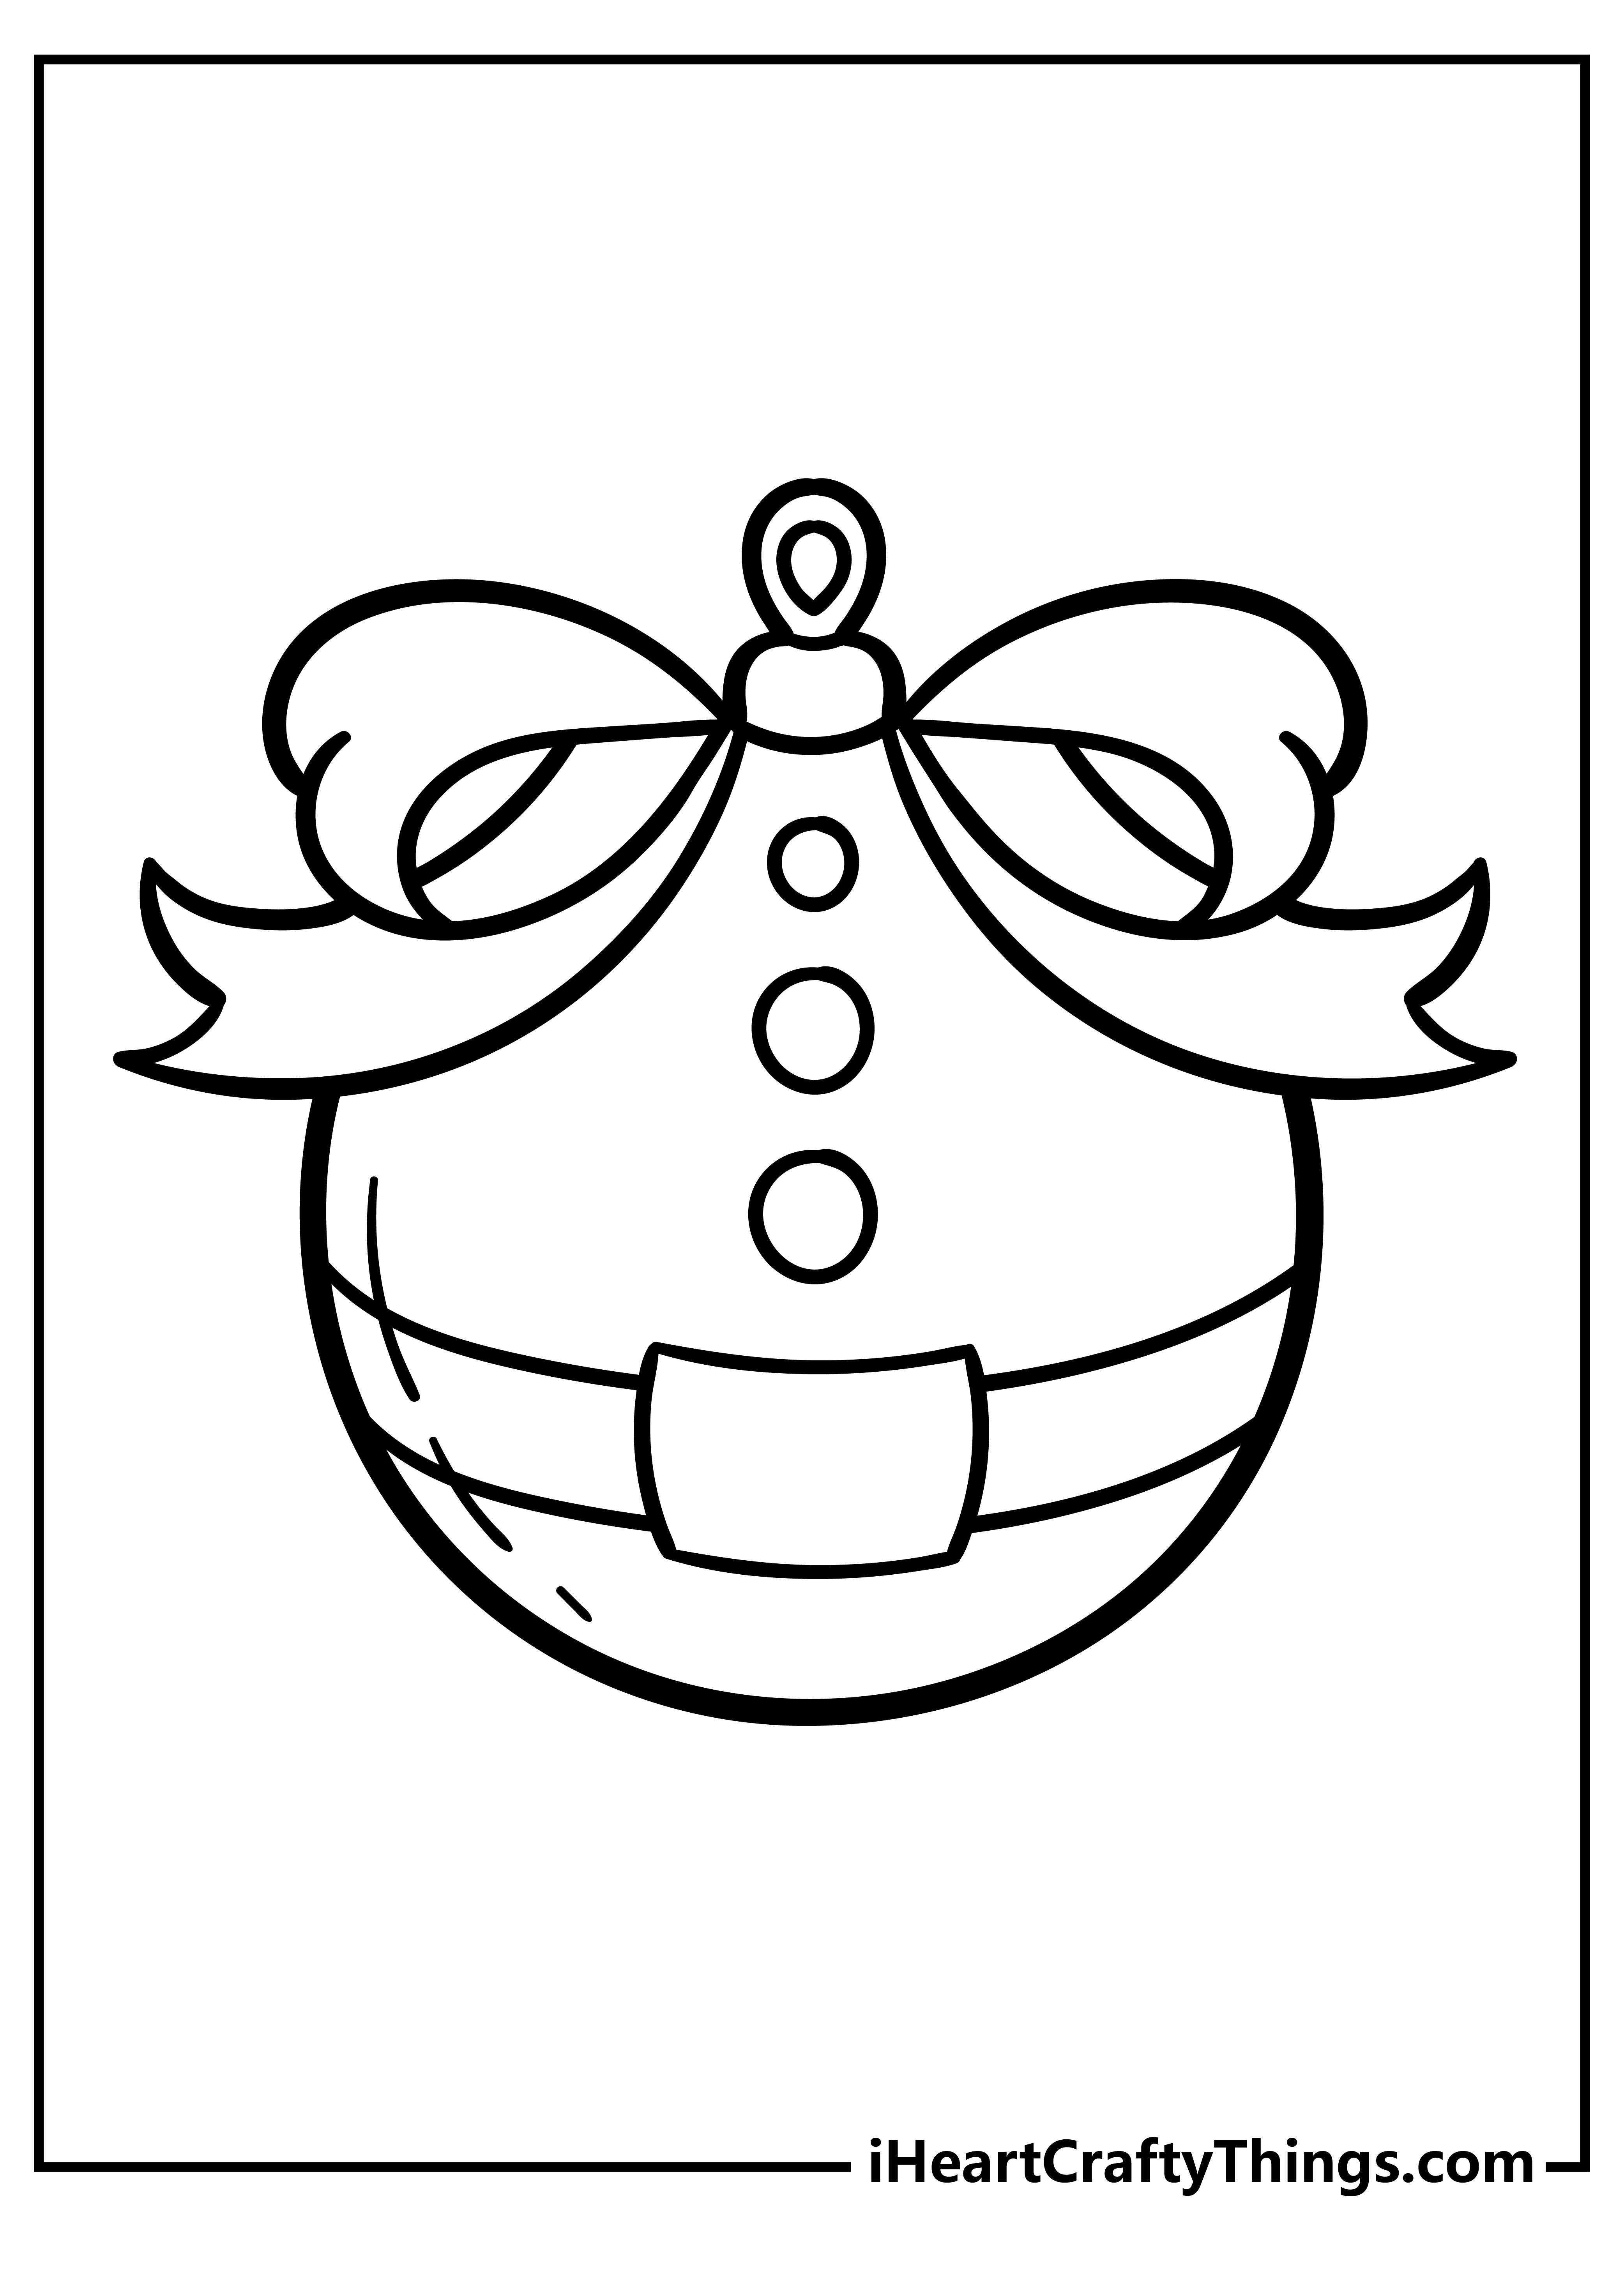 Christmas Ornament Coloring Pages free pdf download